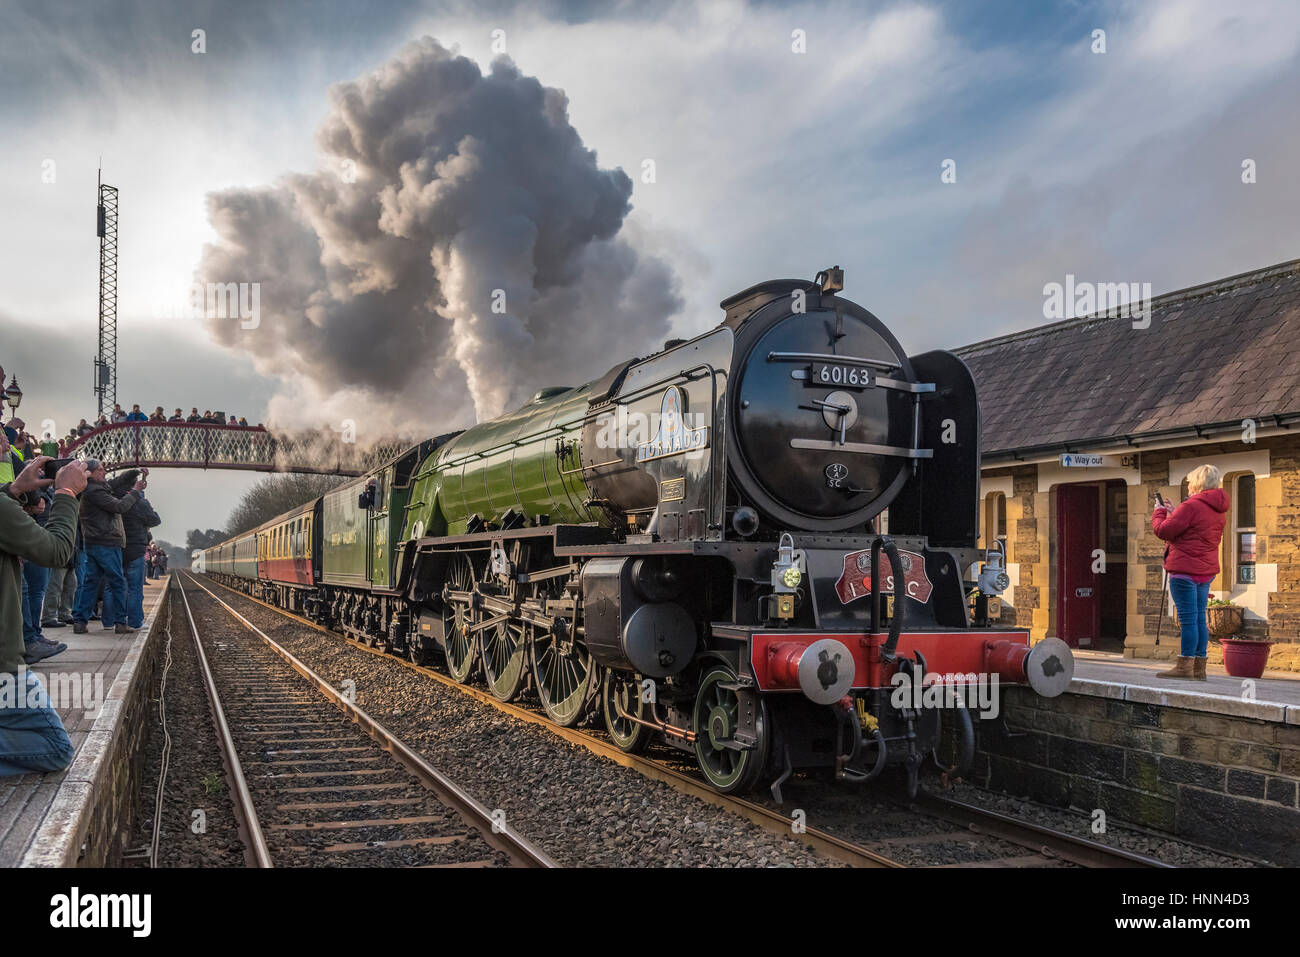 Settle. North Yorkshire. North West England. Wednesday 15th February 2017. The Peppercorn steam engine Tornado on the secnond day of hauling scheduled trains between Skipton and Appleby on the Settle to Carlisle railway. The services are the first schedueld steam hauled services on British rail for 50 years. The tarin is pictured at Settle station with many onlookers with their cameras at the ready. Credit: John Davidson/Alamy Live News. Stock Photo